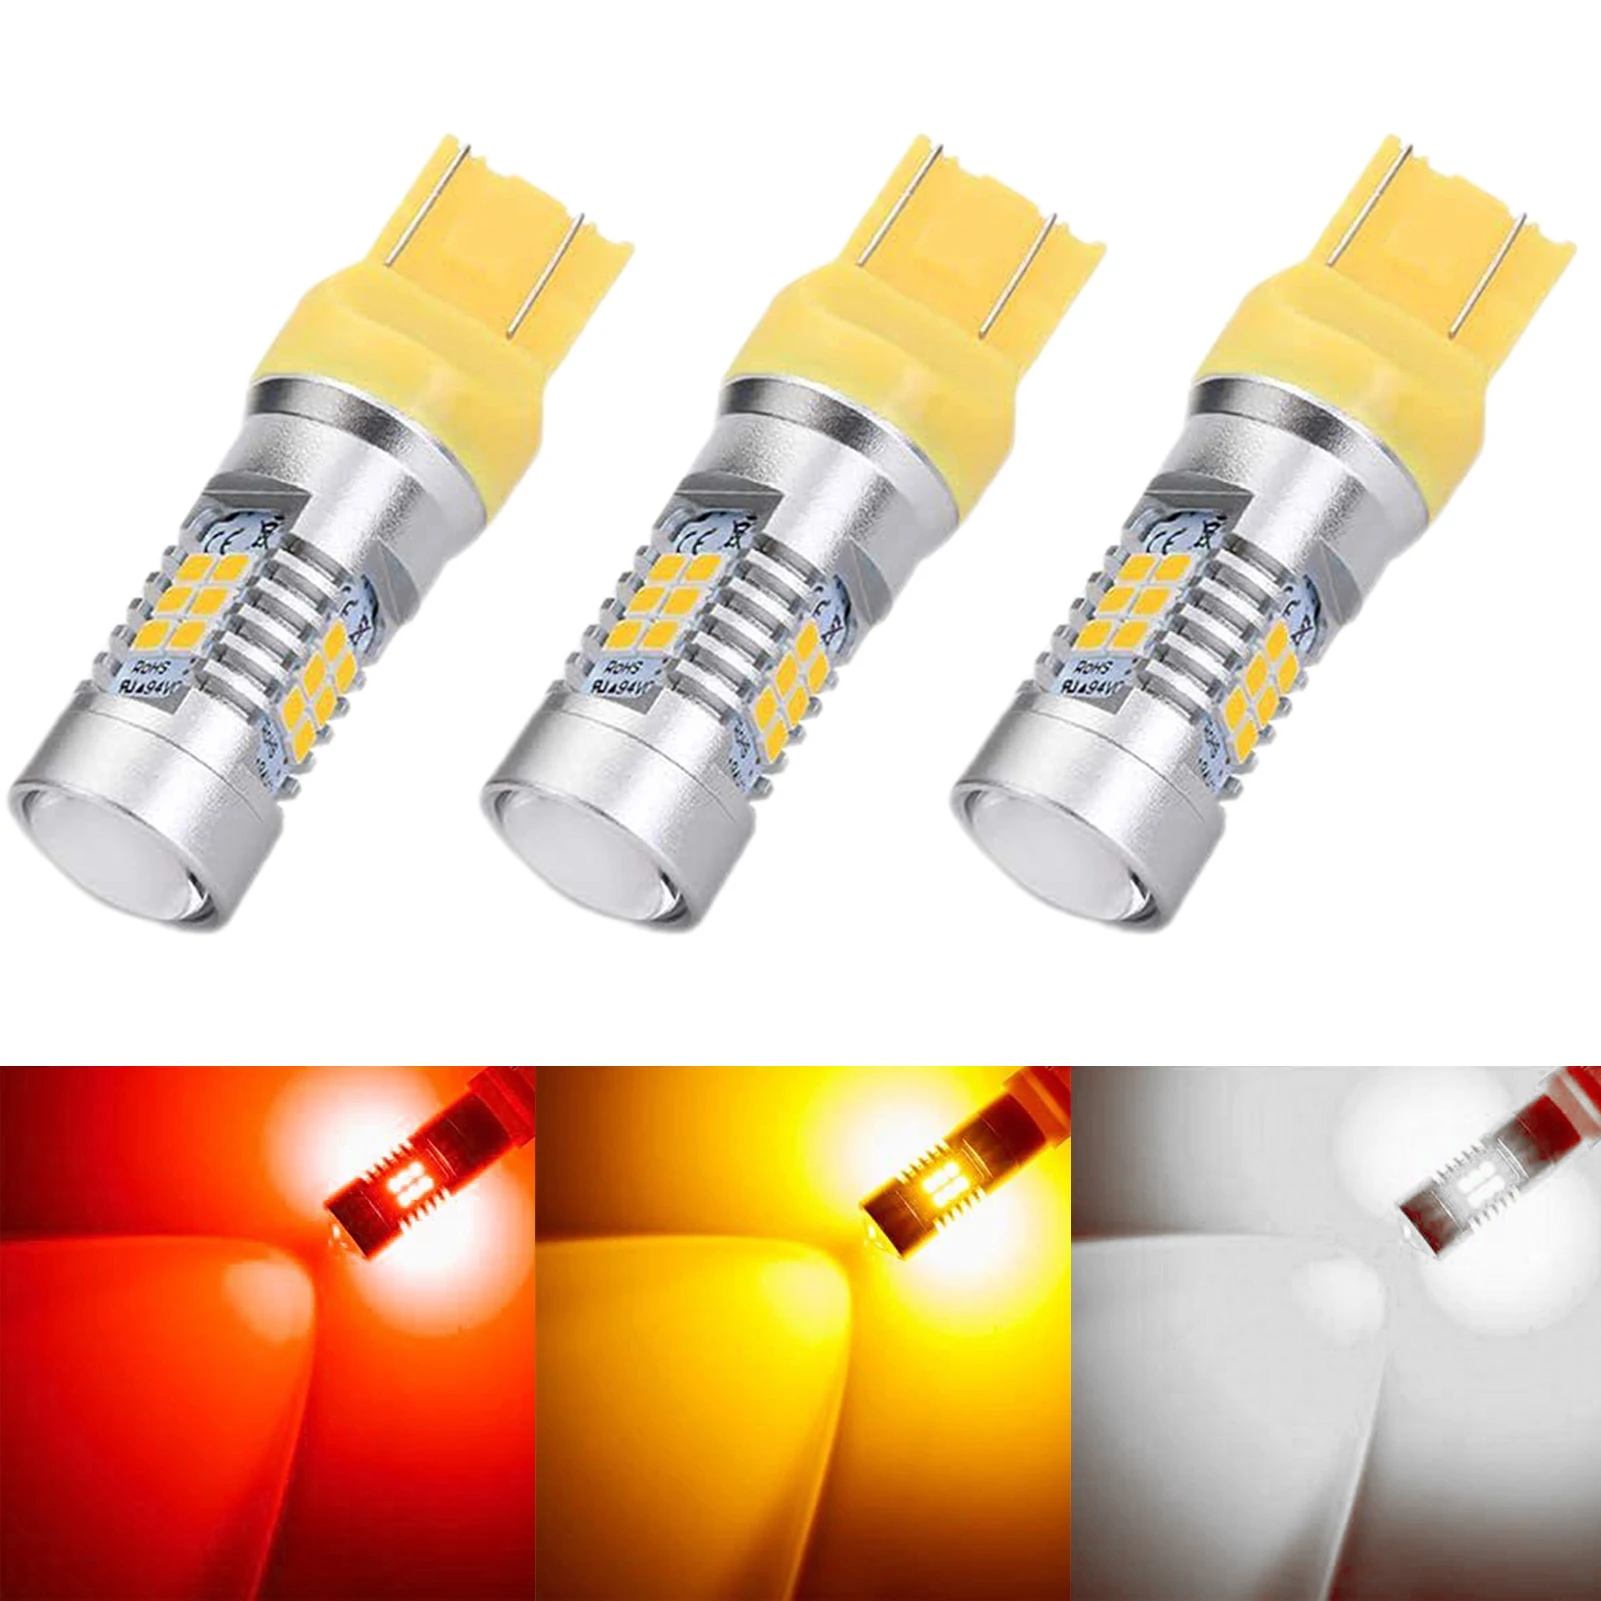 

T20 1050LM 21W 7440 7443 21 LED Bulb 12V-24V Extremely Bright 2835 Chips LED Light Bulb 21W High Power 2835 Chips Extremely